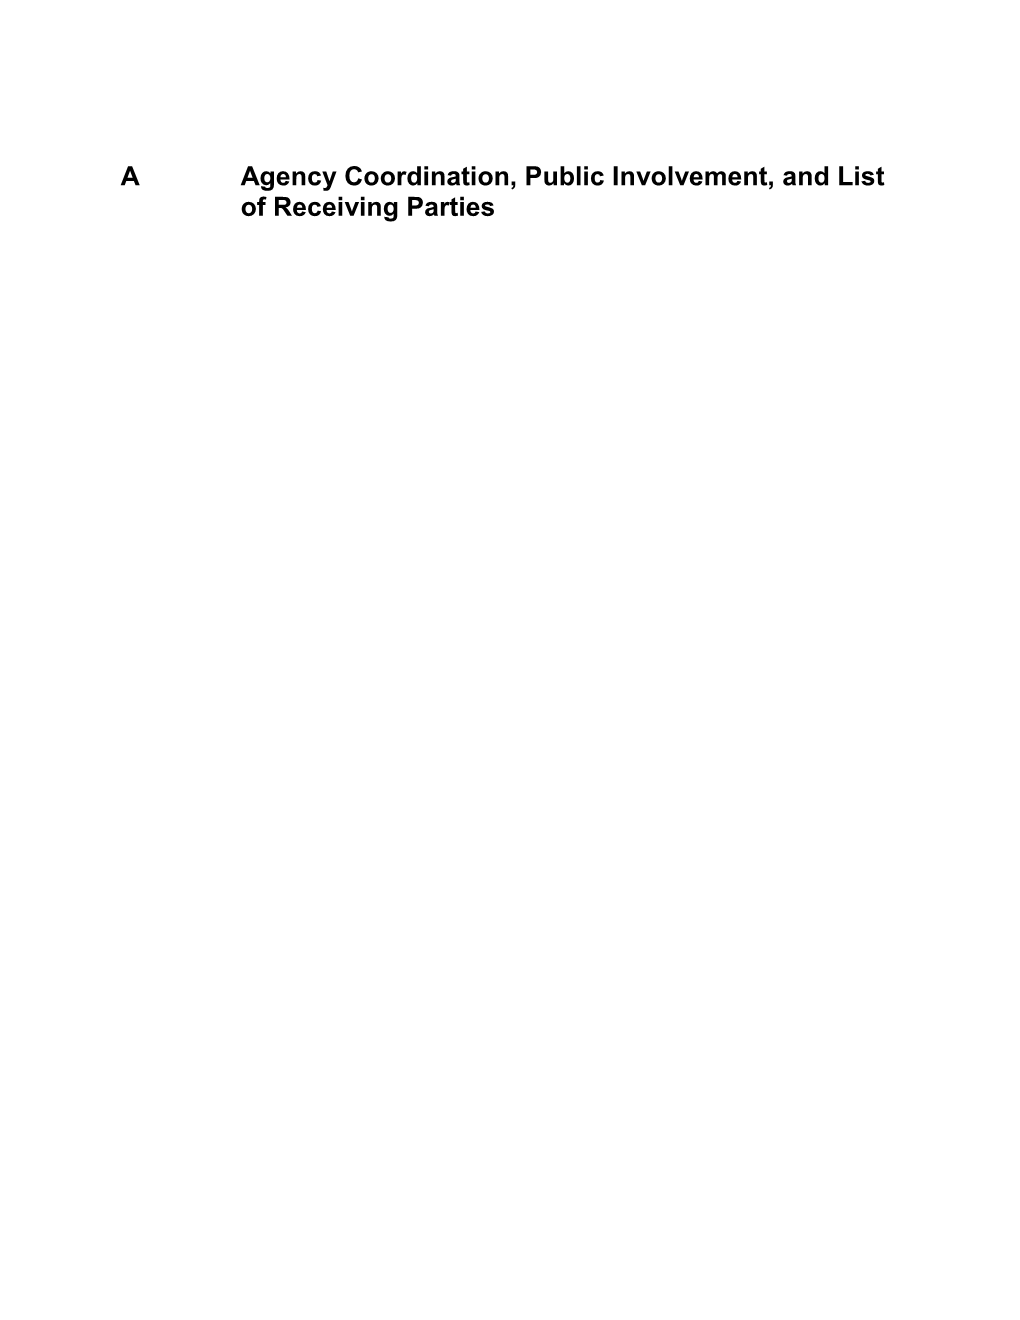 A Agency Coordination, Public Involvement, and List of Receiving Parties